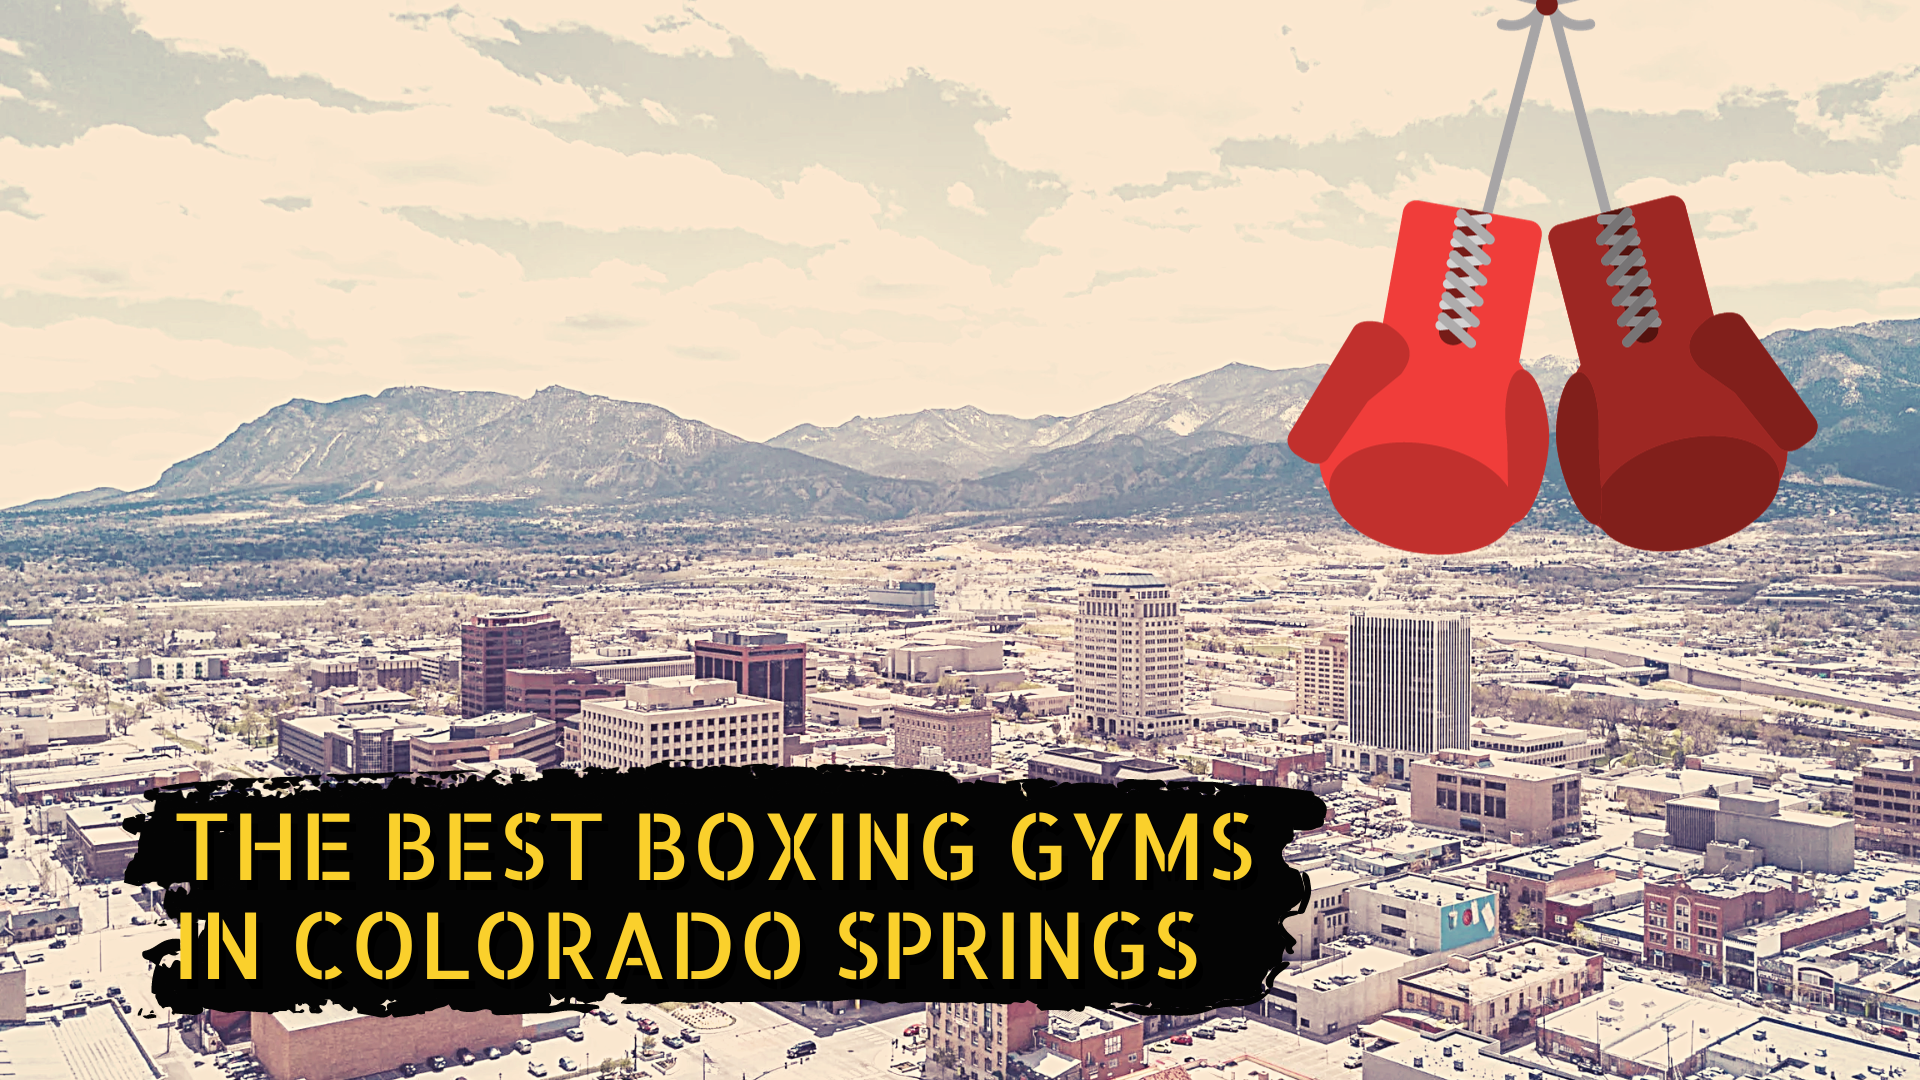 Montreal skyline and the title the best boxing gyms in Colorado Springs